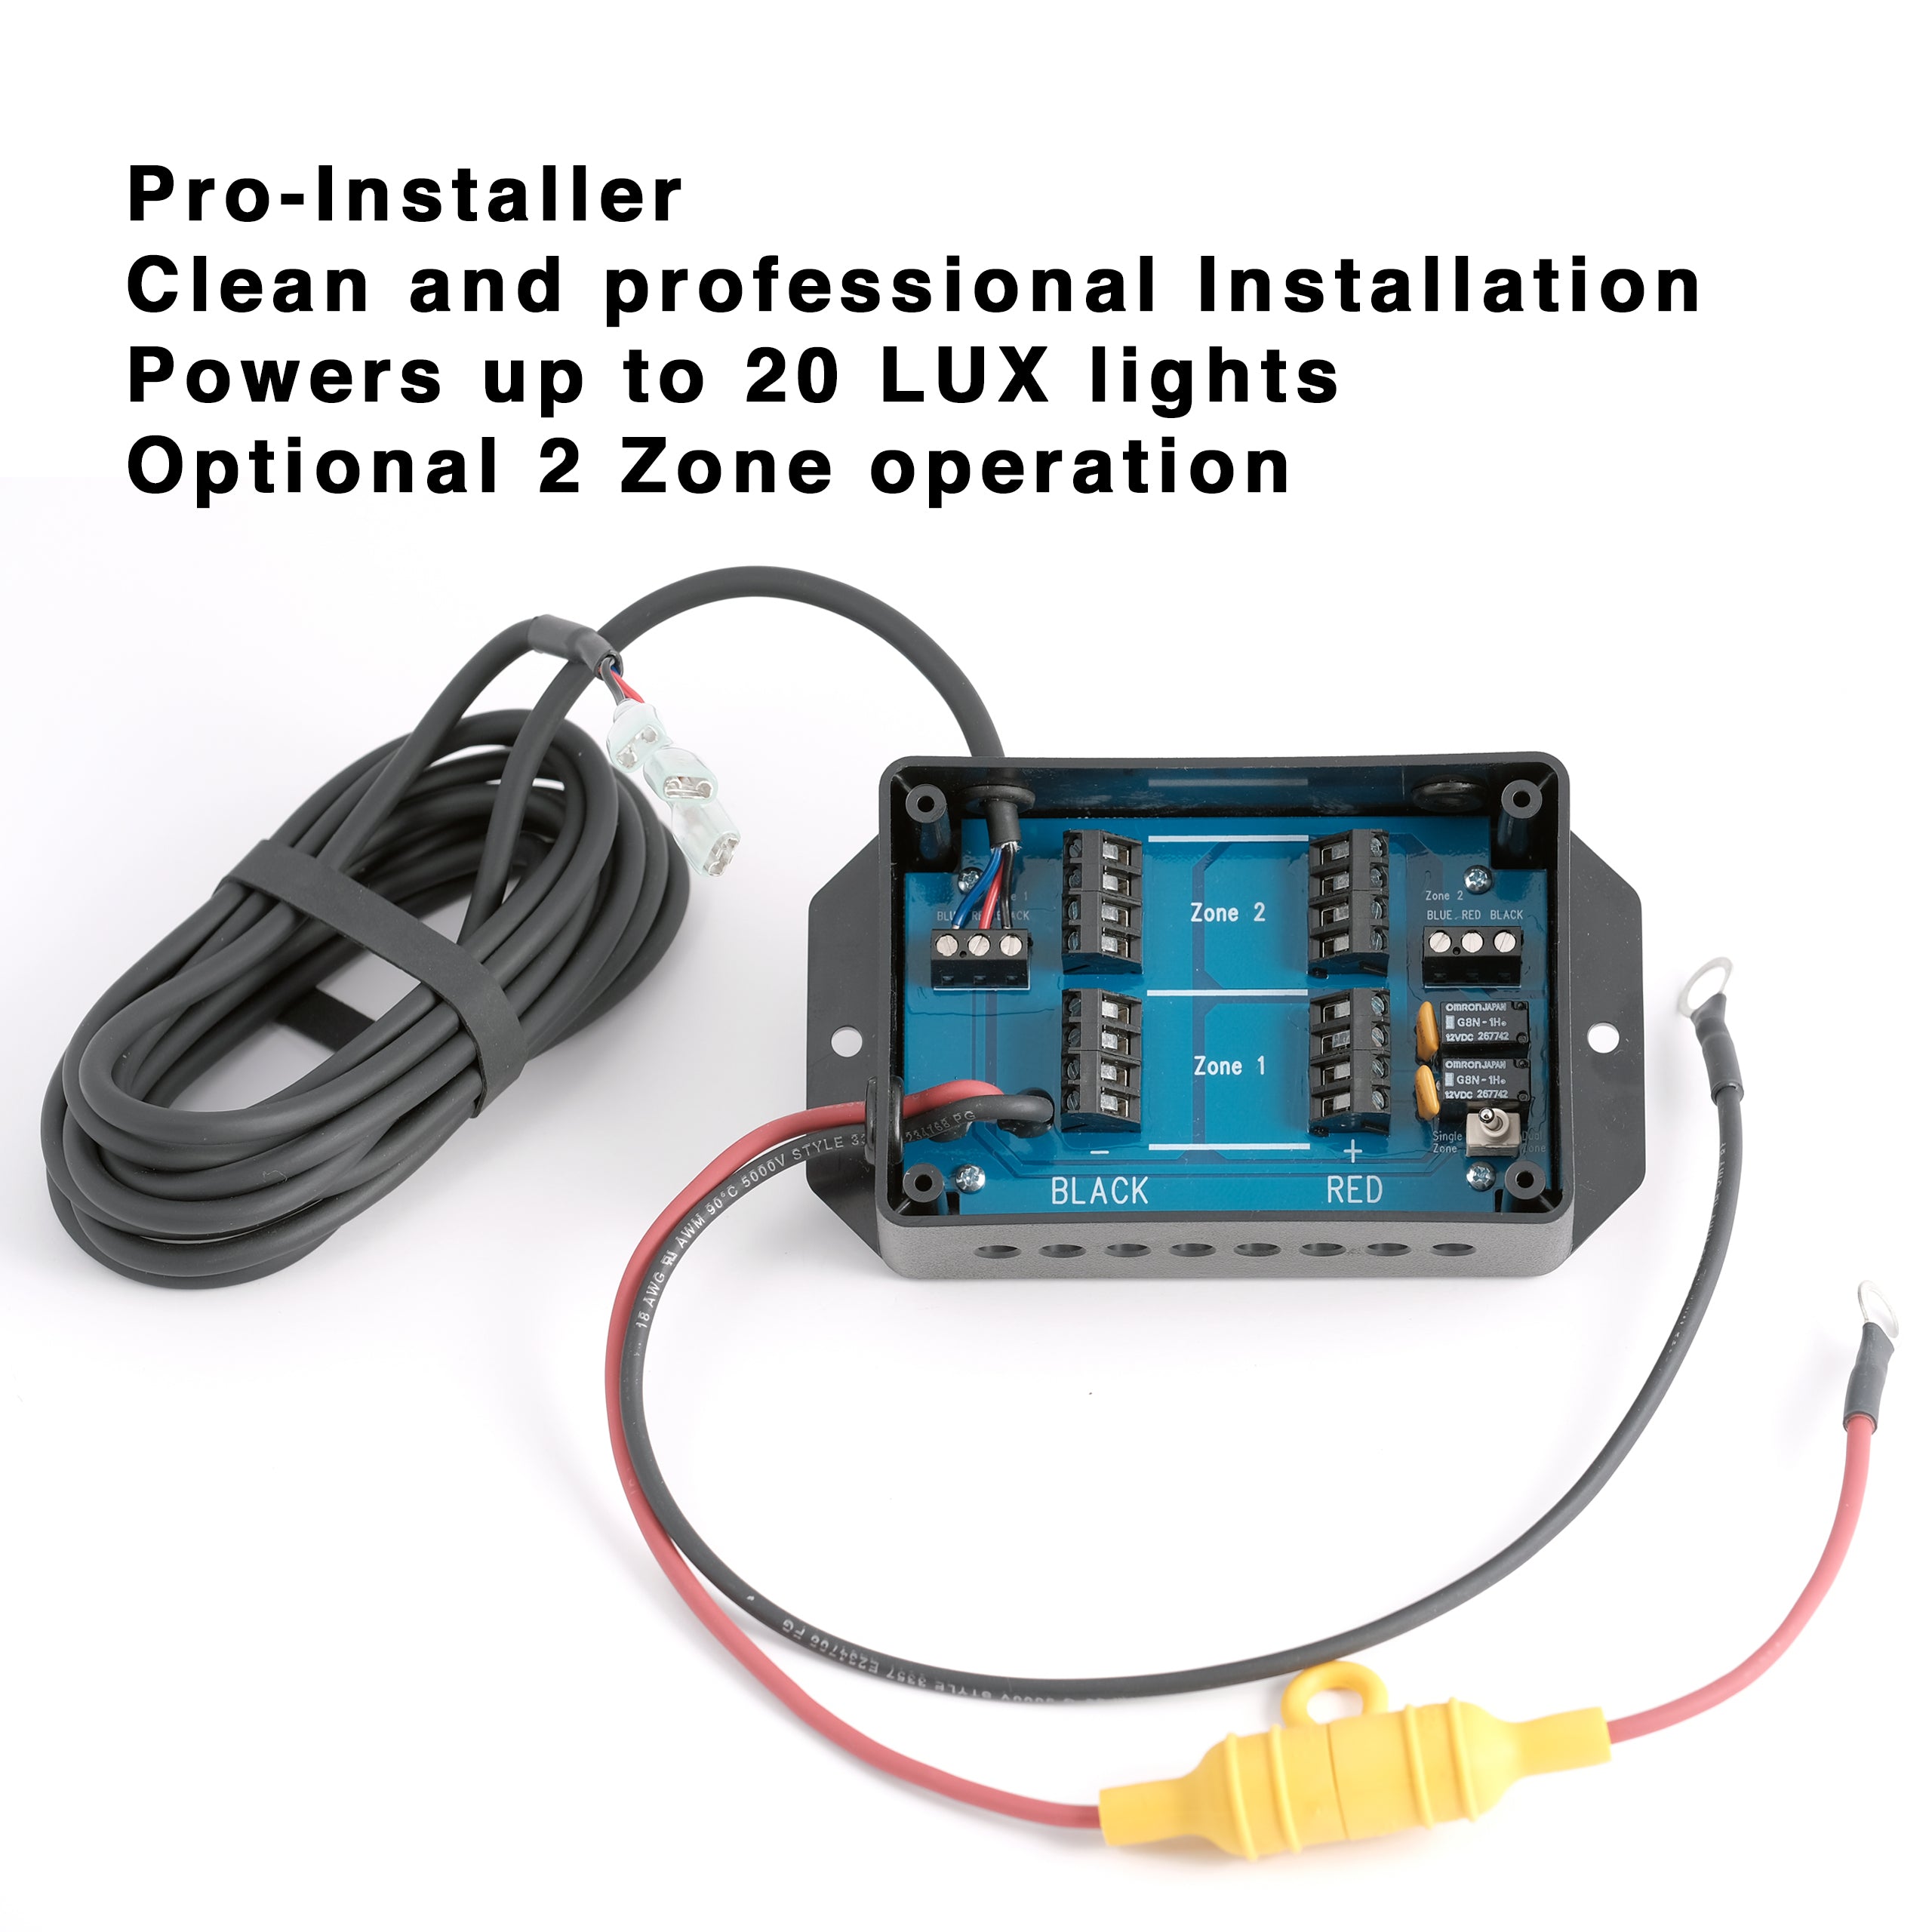 Bluetooth RGB Rock Light Controller Single Zone - LUX Lighting Systems